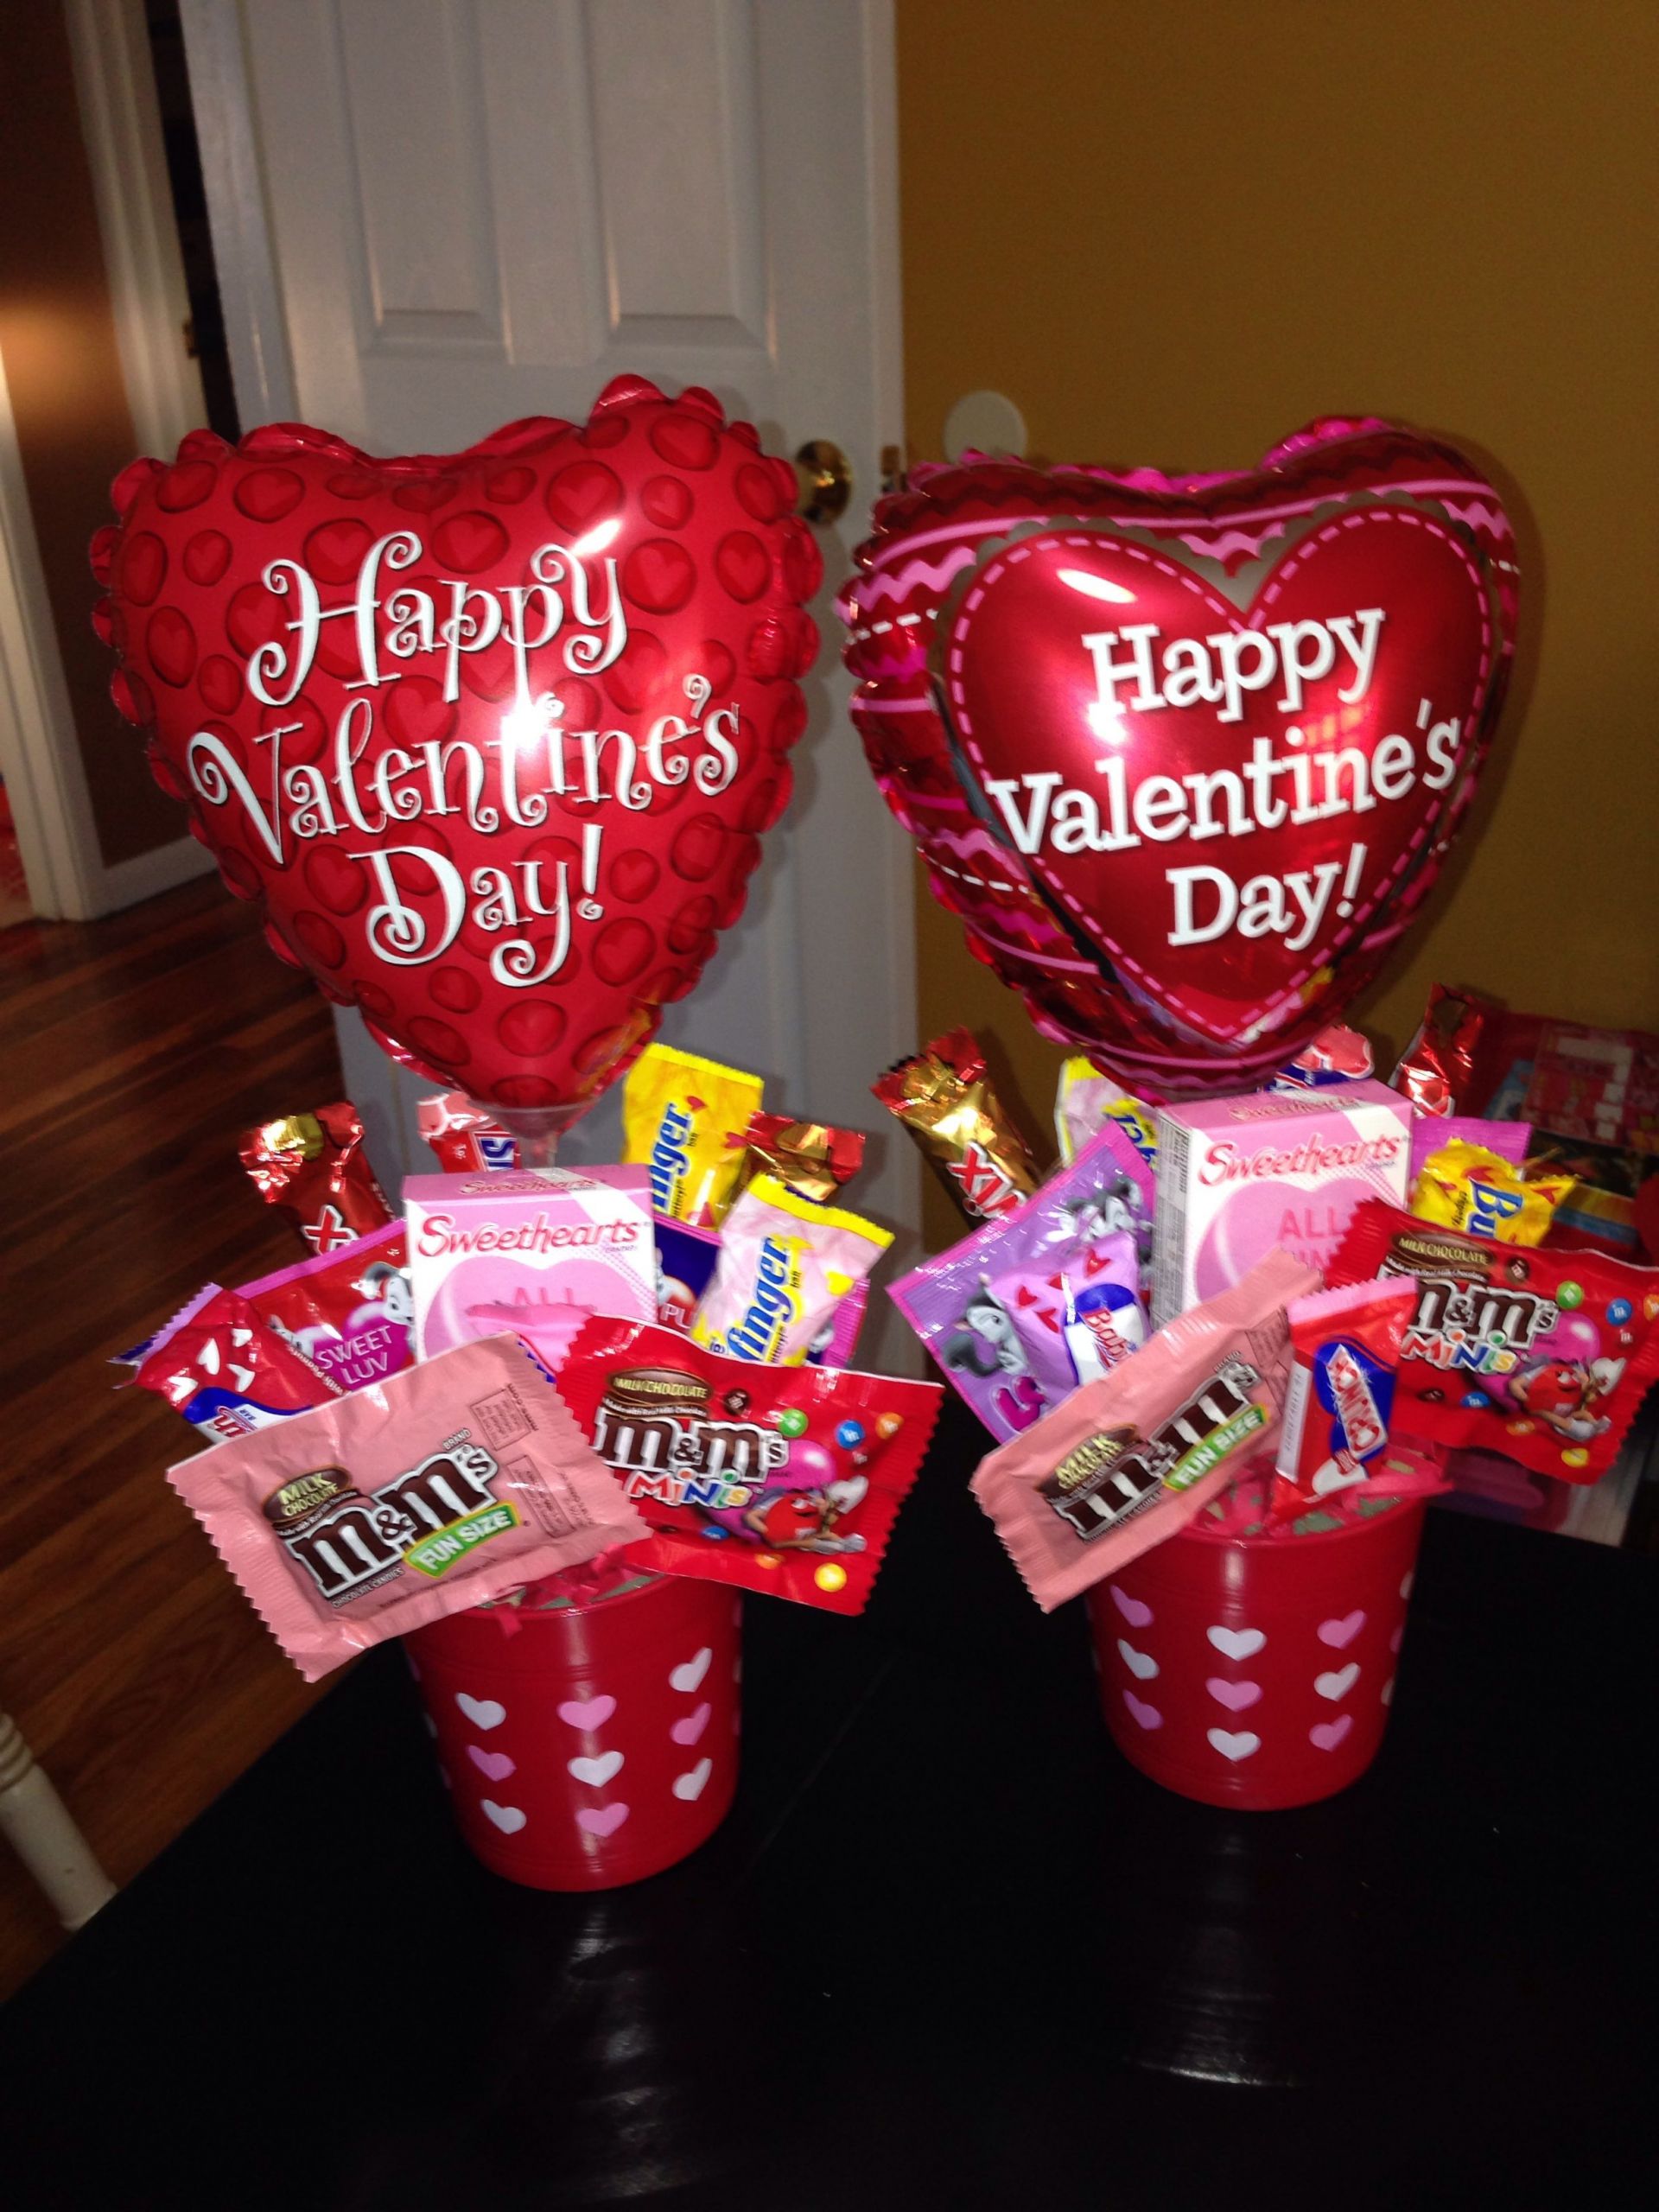 Homemade Valentine Gift Basket Ideas
 Small valentines bouquets